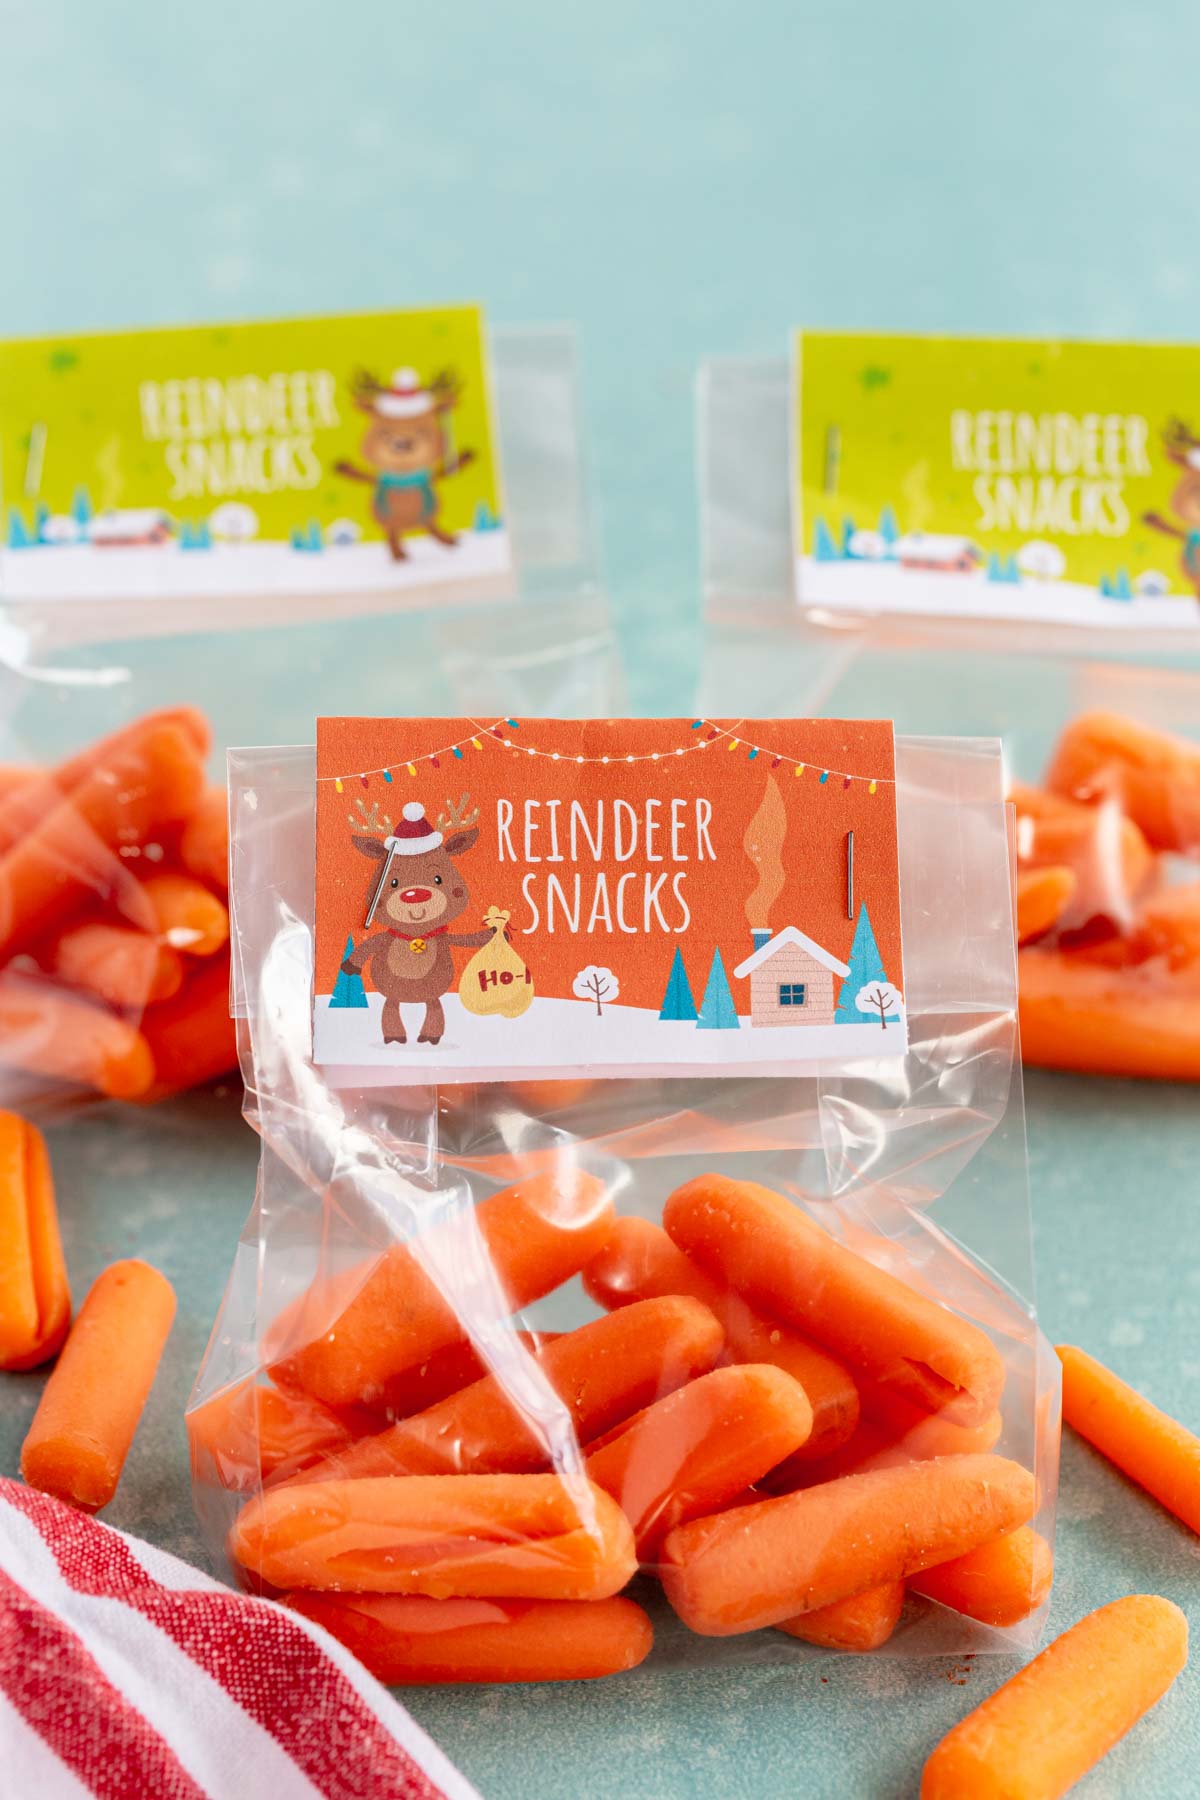 baby carrots in a bag with a sign that says reindeer snacks